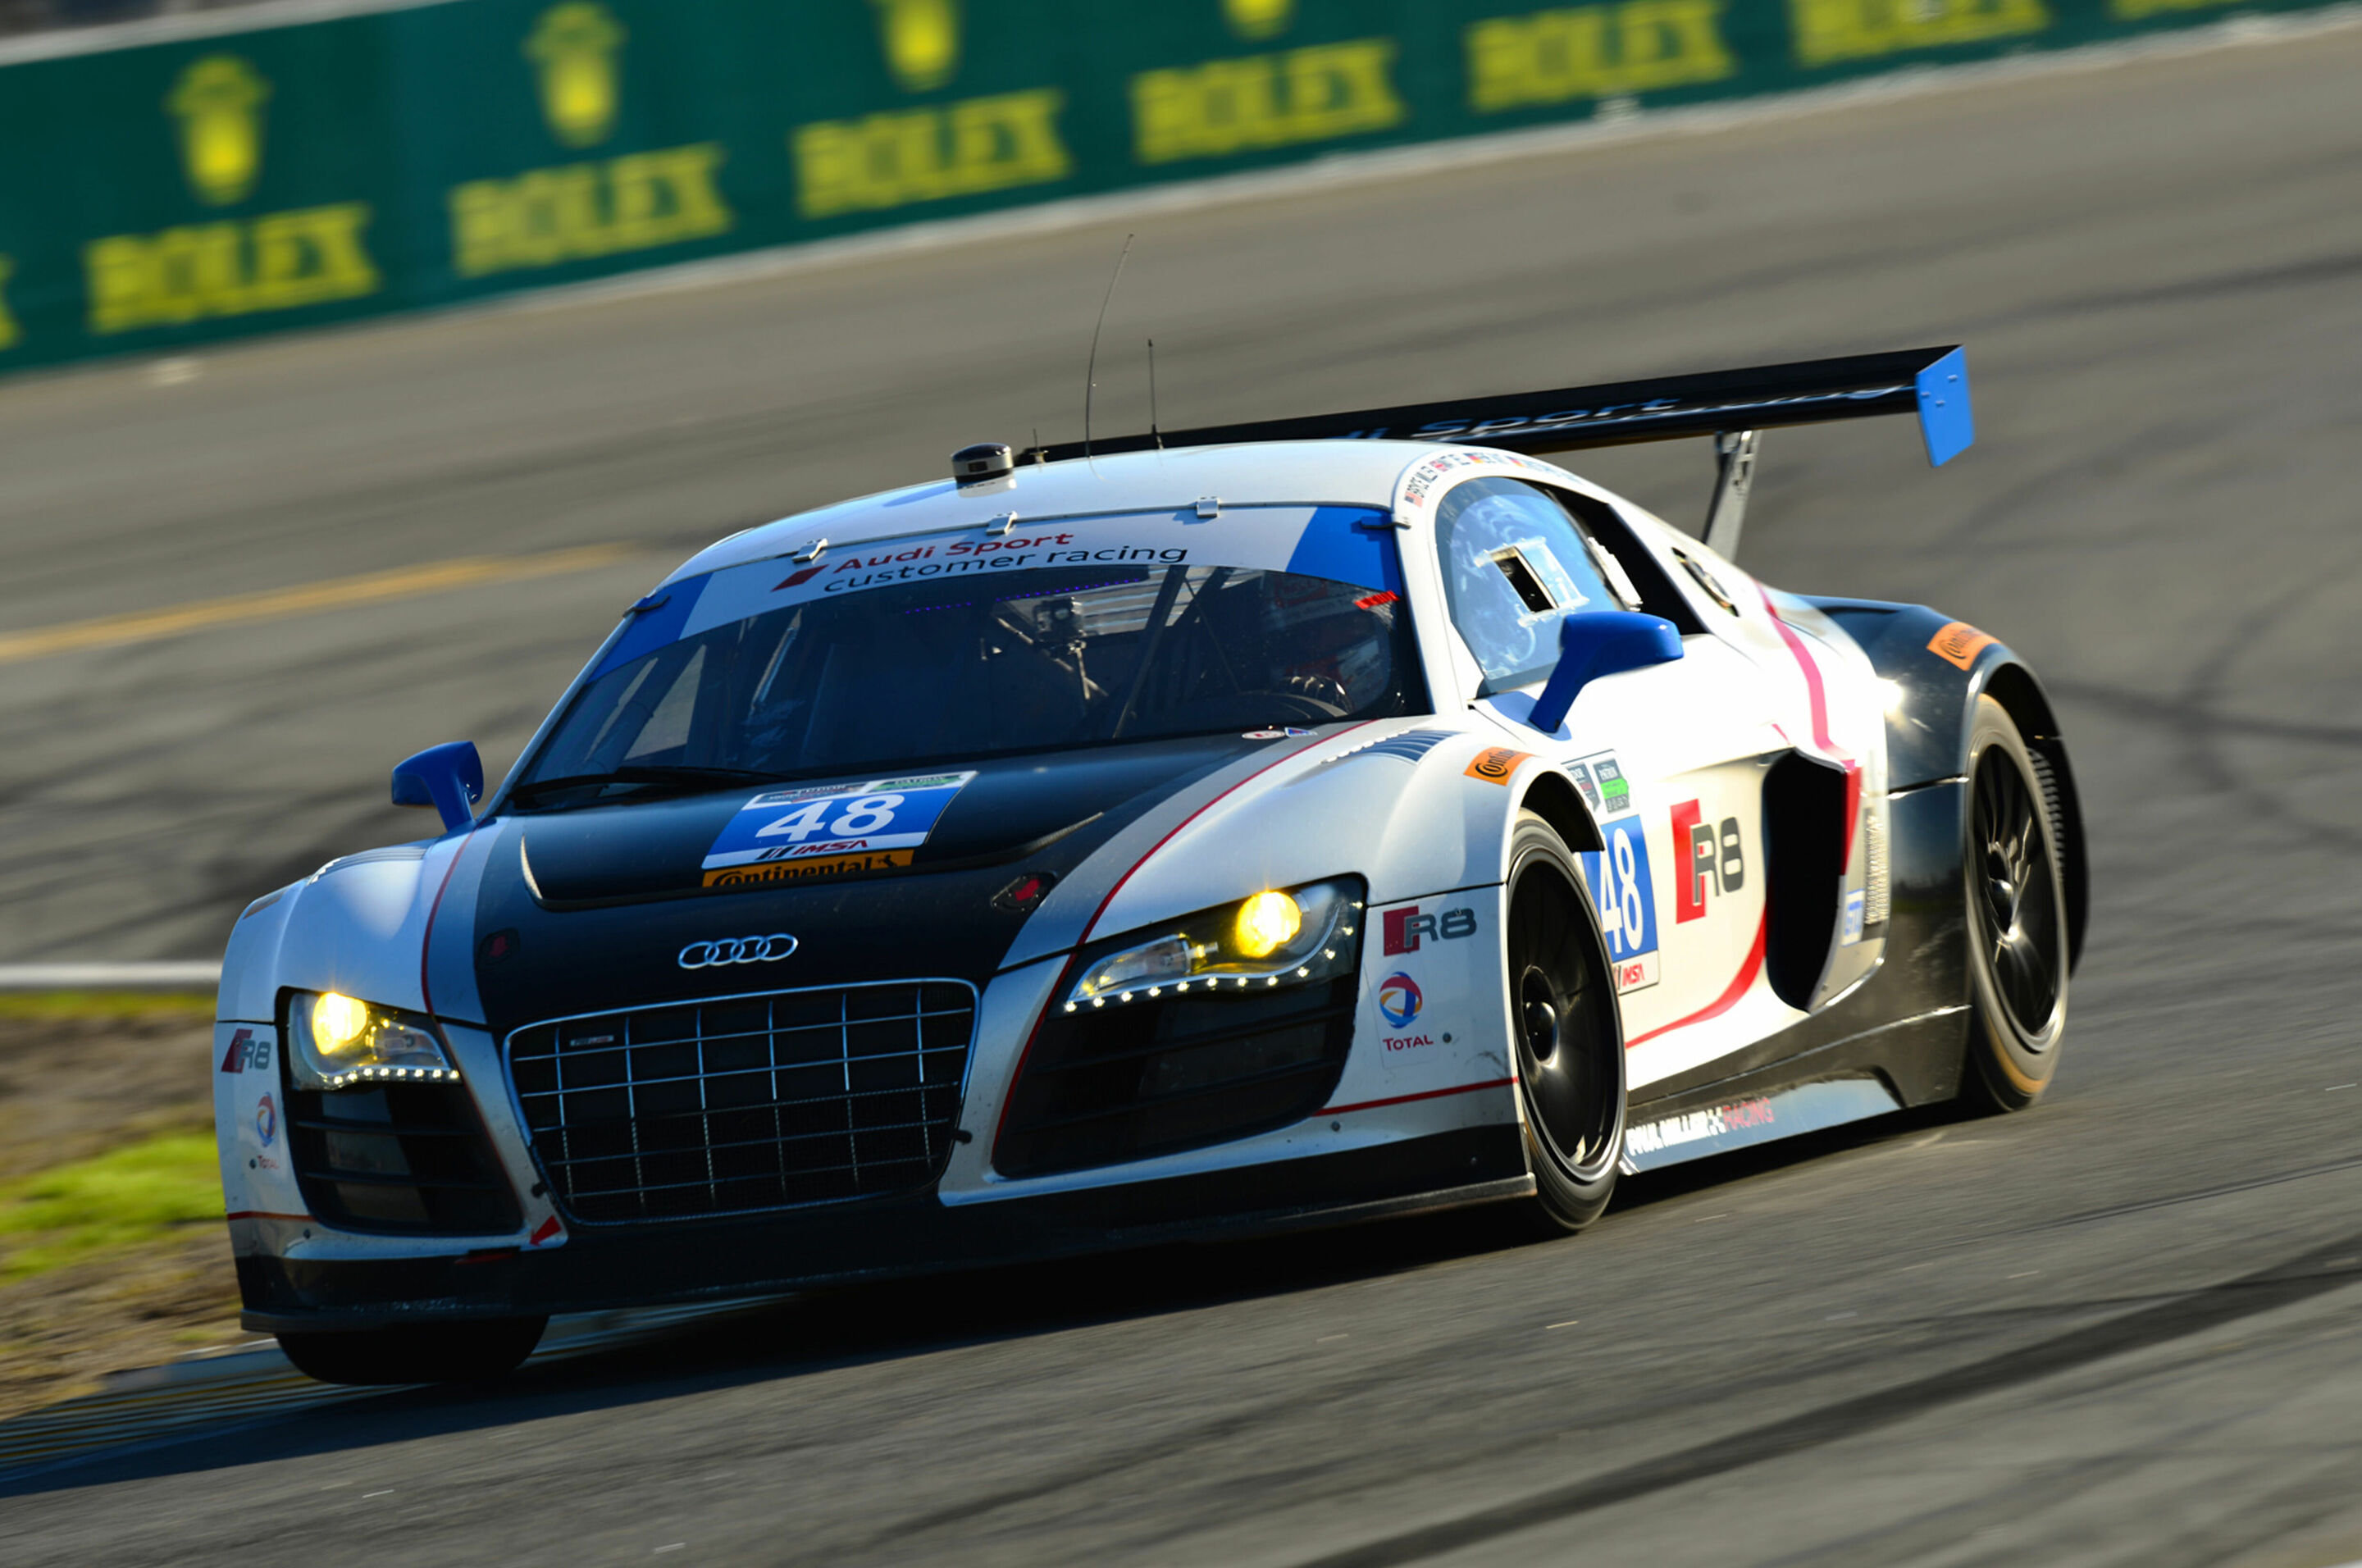 First pole position for Audi at Daytona